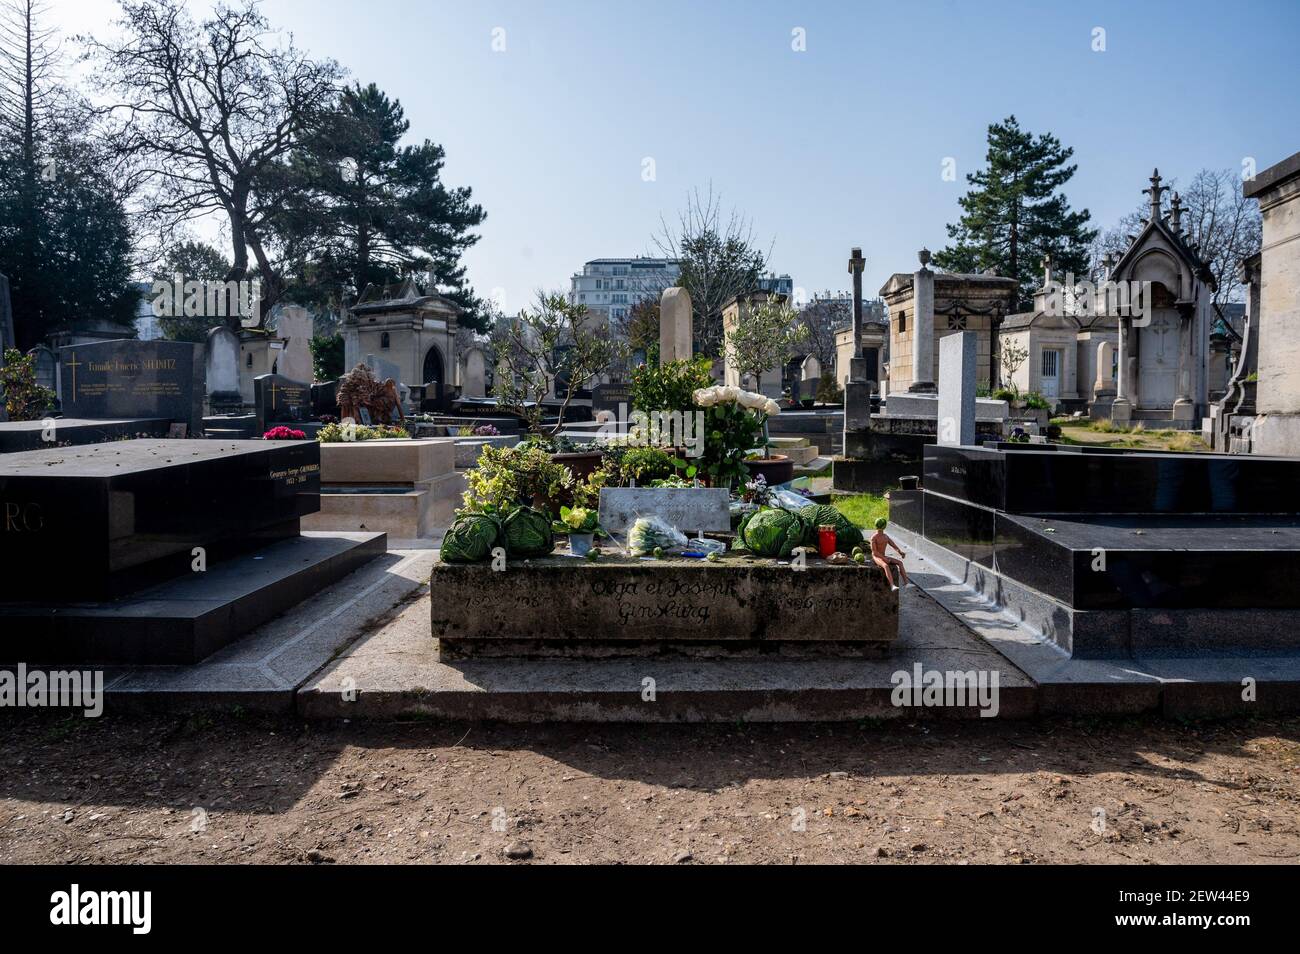 Fans gather next to the late singer and author Serge Ganisbourg’s grave, in Montparnasse cemetery in Paris, France, on March 2, 2021, on the very day that Gainsbourg passed away 30 years ago, on March 2, 1991. Photo by Ammar Abd Rabbo/ABACAPRESS.COM Stock Photo